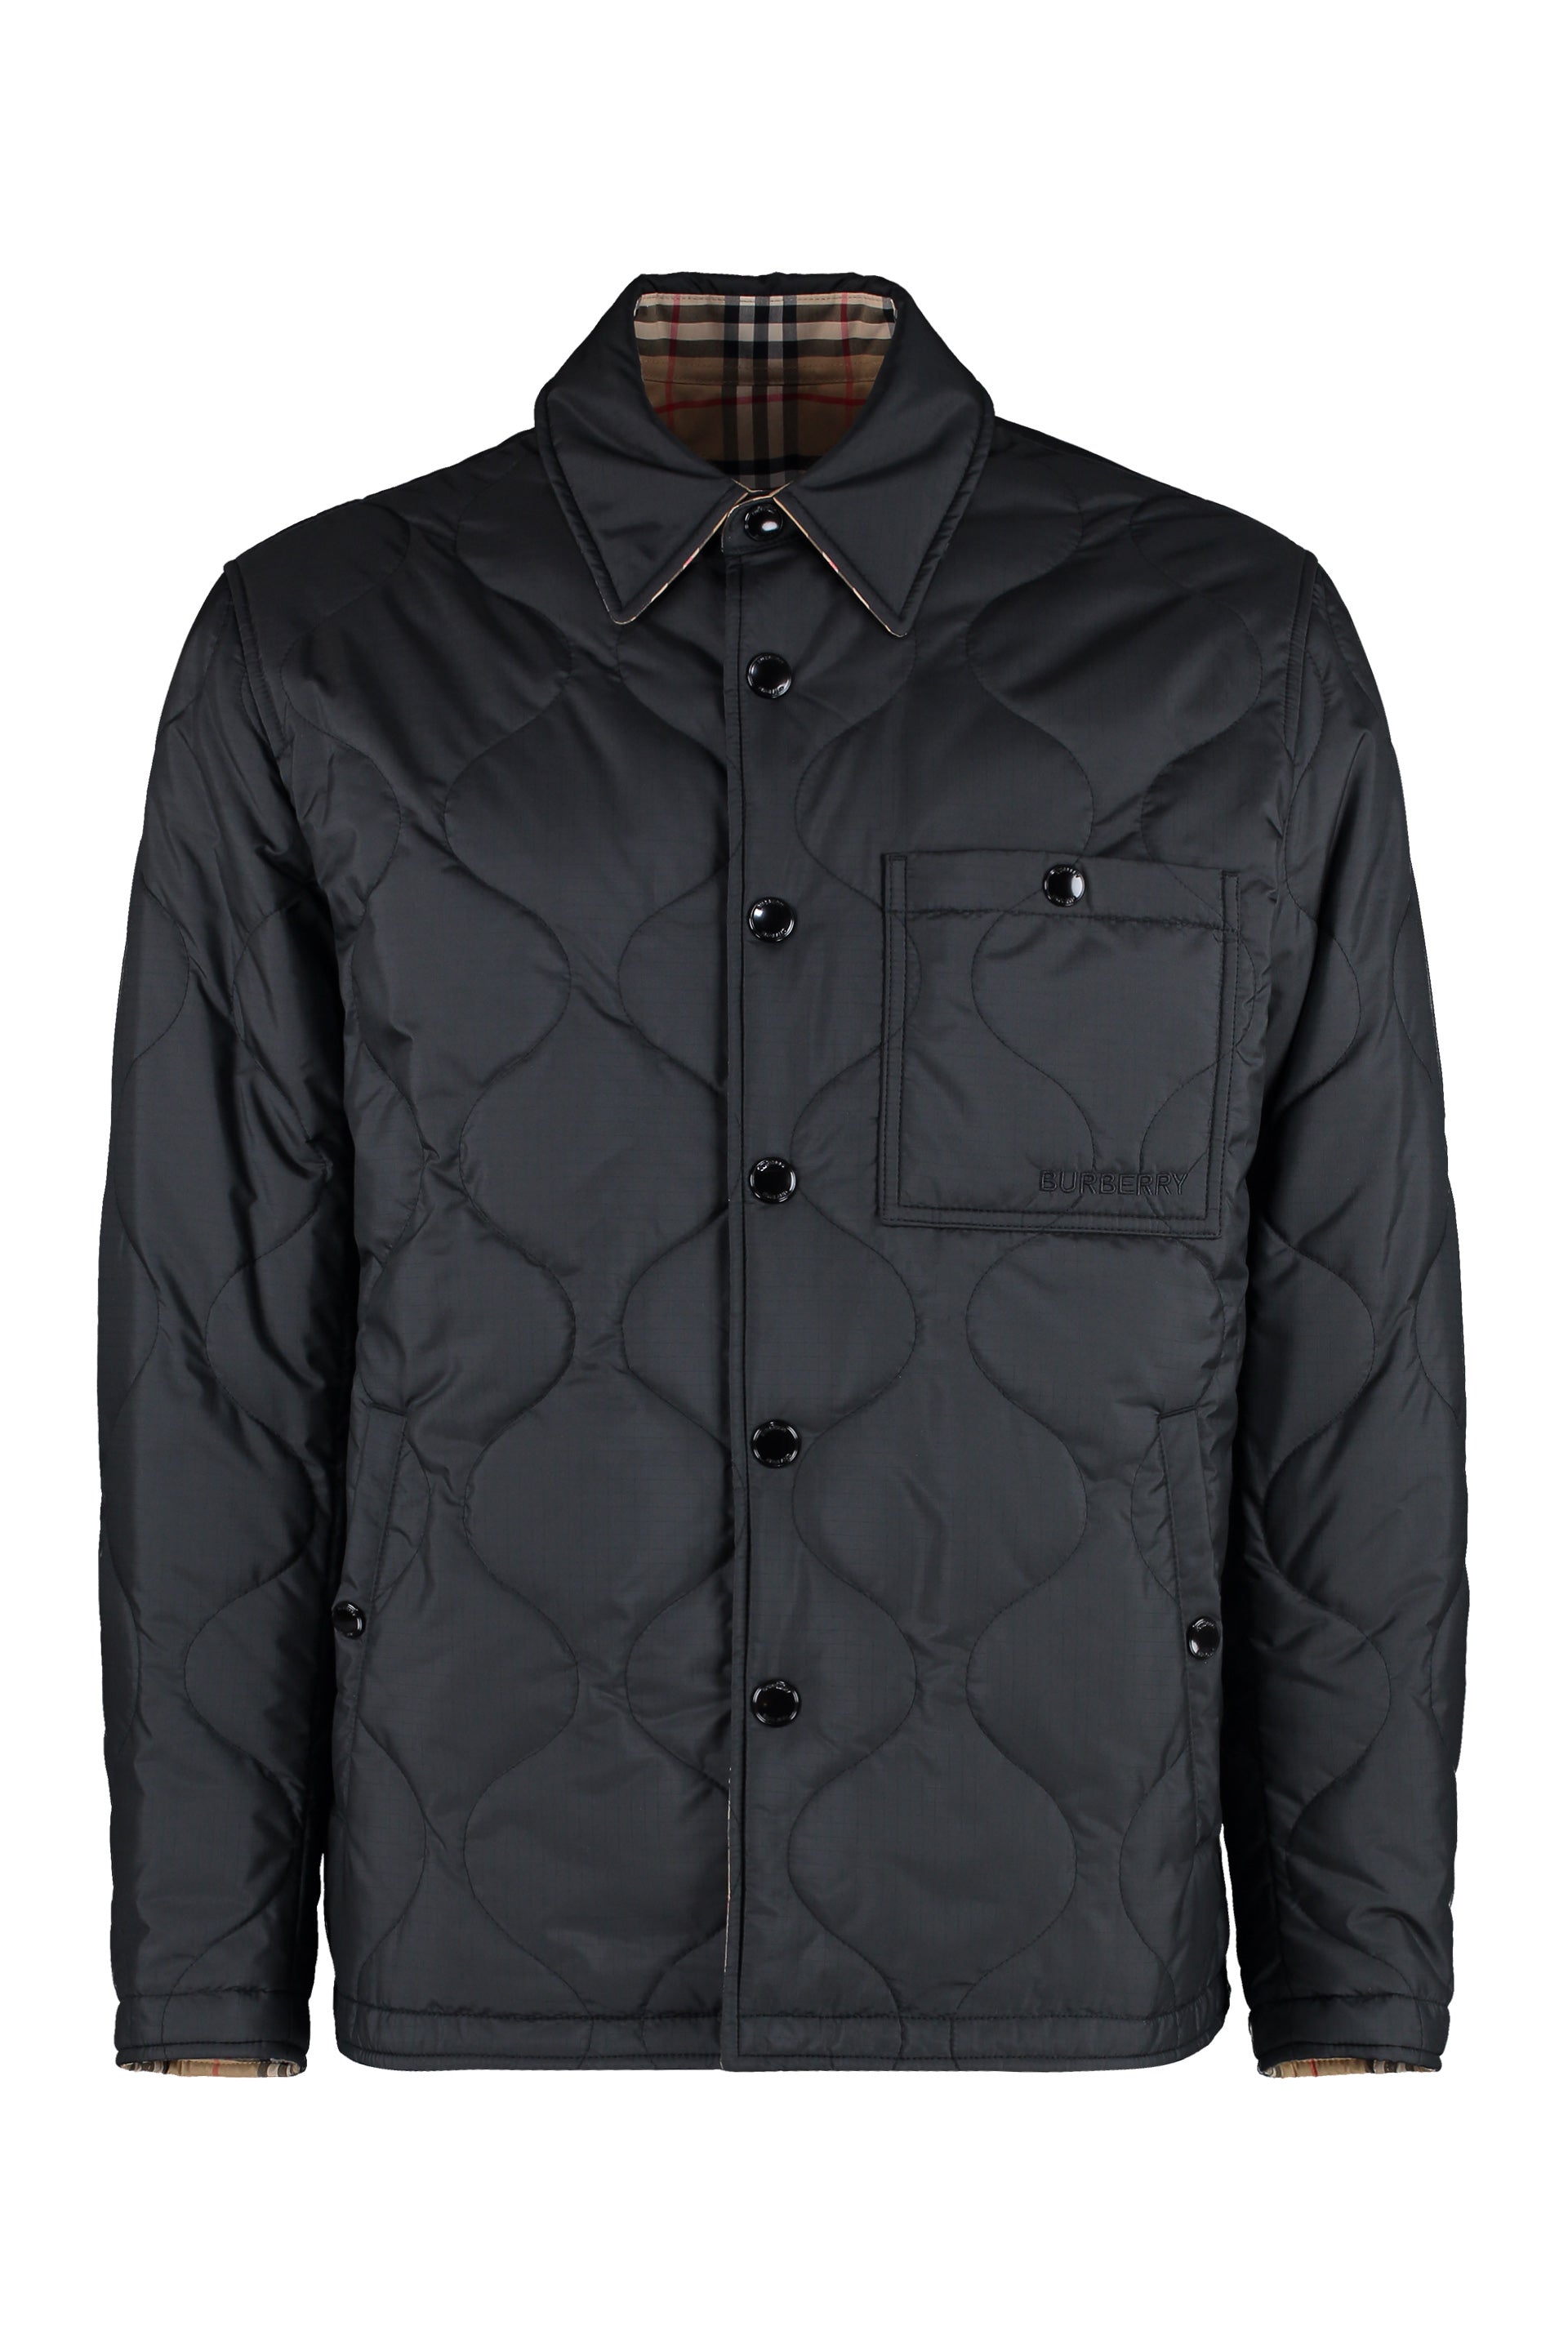 Shop Burberry Reversible Quilted Jacket For Men In Black